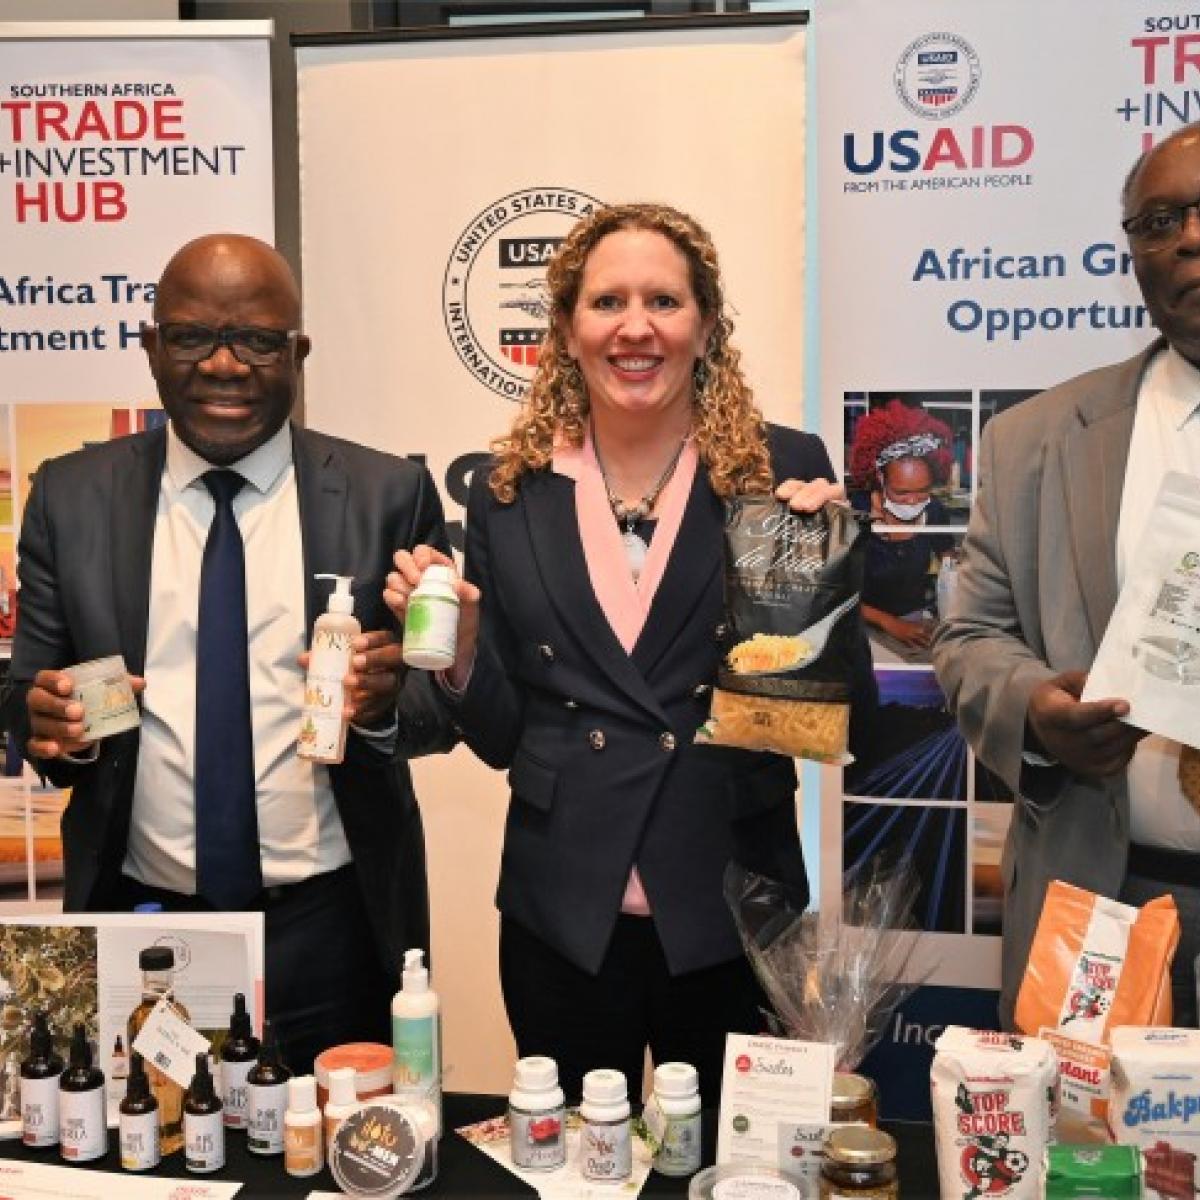 Executive Director of the Ministry of Industrialization and Trade, Sikongo Haihambo, Chargé d’Affaires of the U.S. Embassy Jessica Long, and USAID Country Representative Dr. McDonald Homer presenting products of Namibian companies that are supported by the USAID TradeHub program.